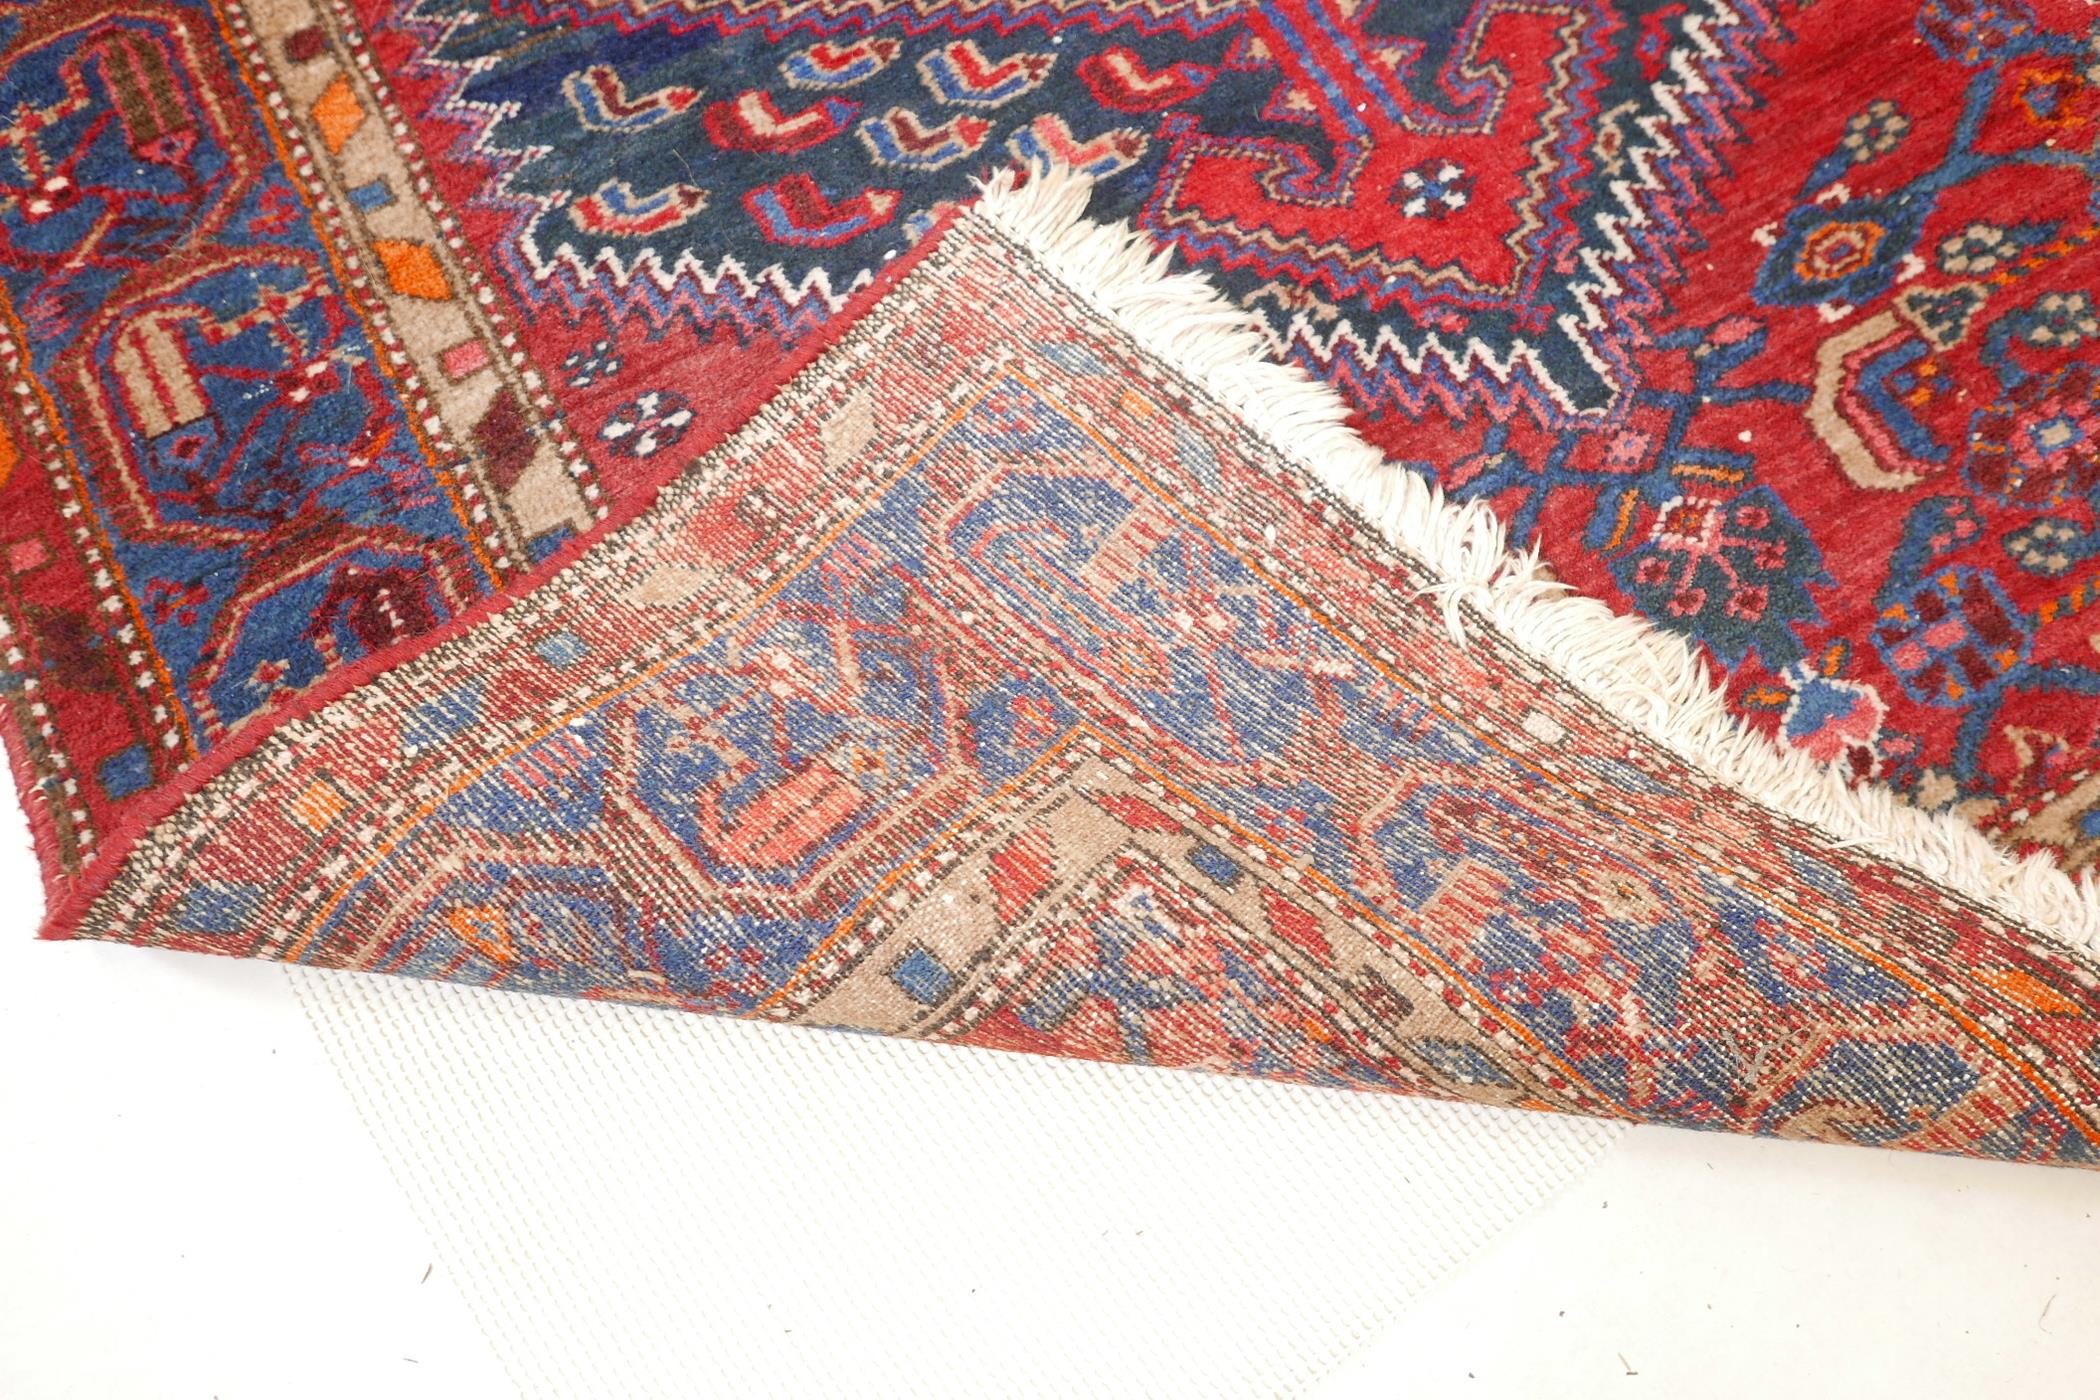 A Persian red ground wool carpet with a centralised medallion design on a blue border, 52" x 80" - Image 4 of 4